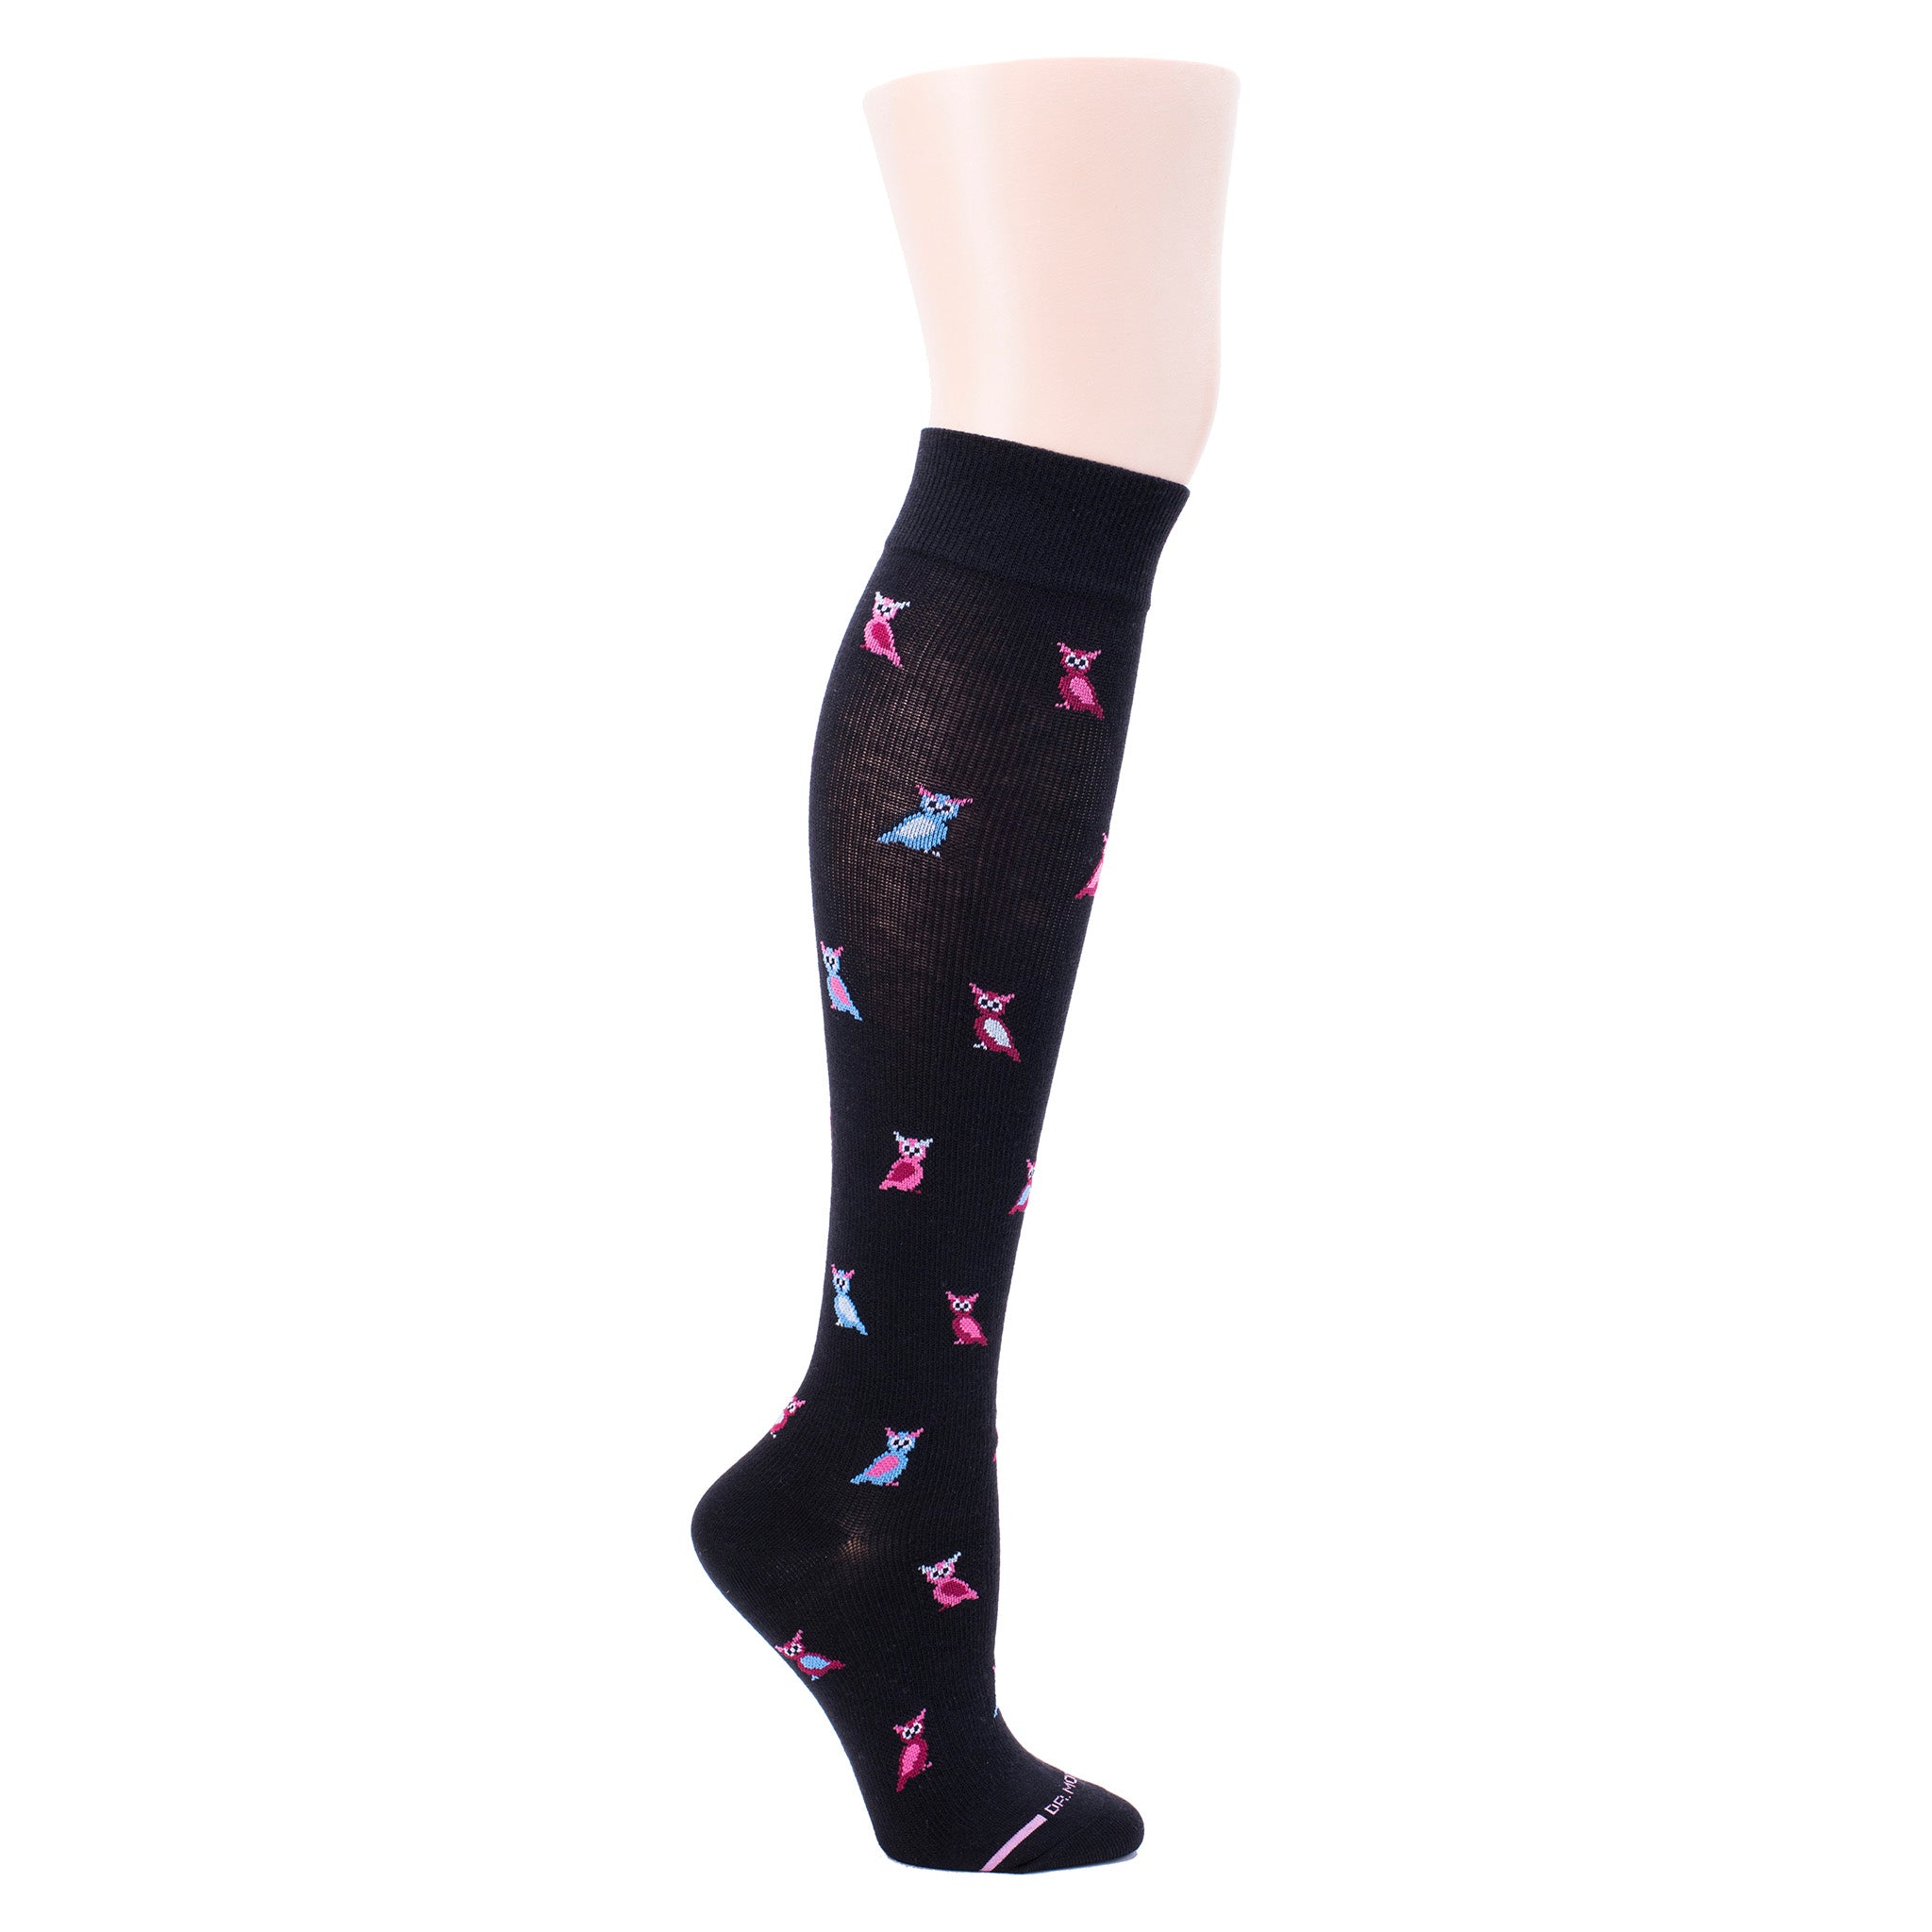 Owls All Over | Knee-High Compression Socks For Women